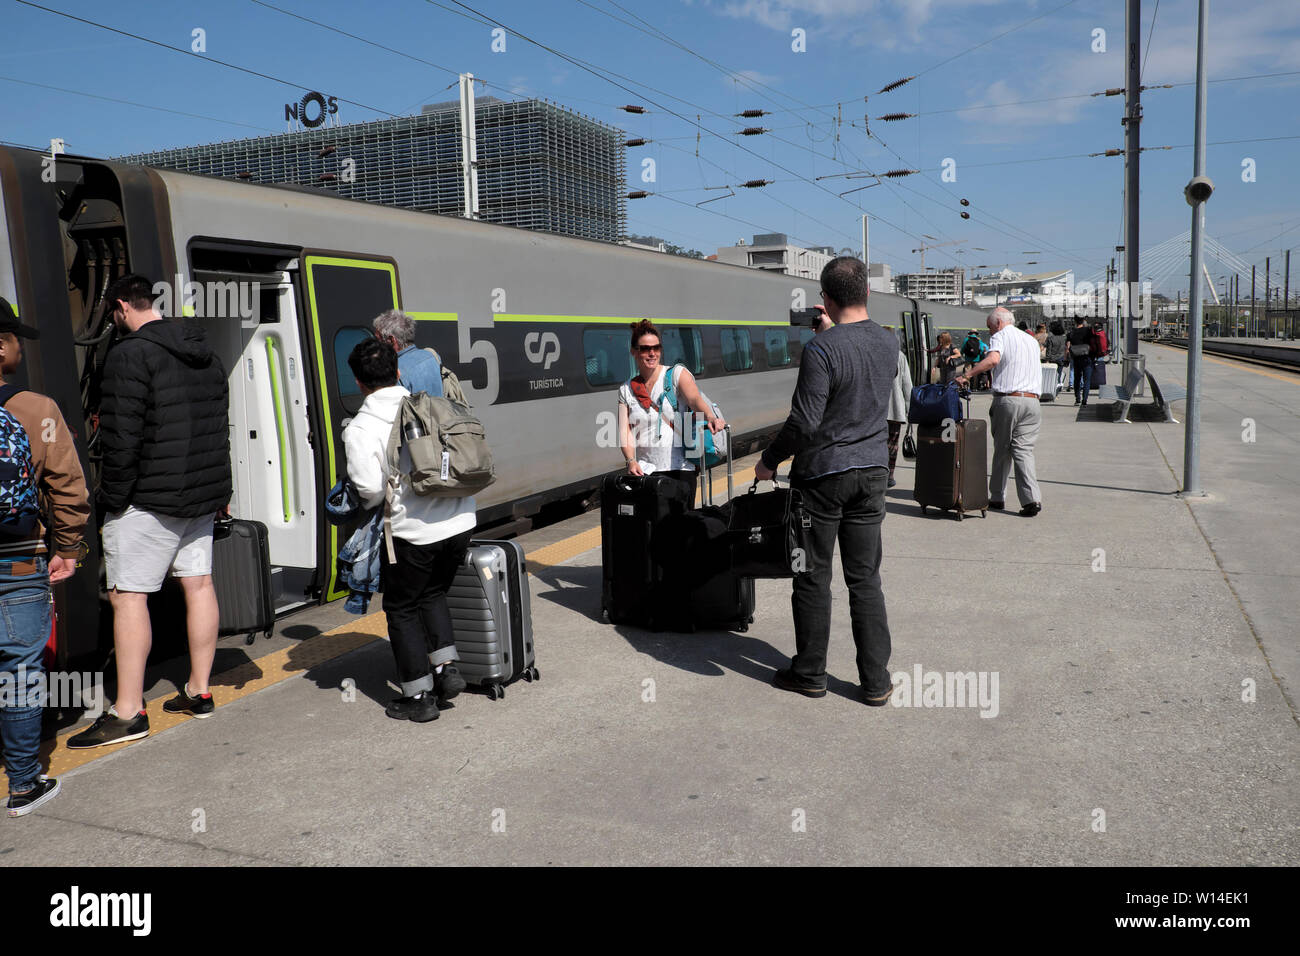 Passengers & luggage boarding the Alfa Pendular high speed train to travel from Campanha station Porto to Lisbon city in Portugal Europe  KATHY DEWITT Stock Photo